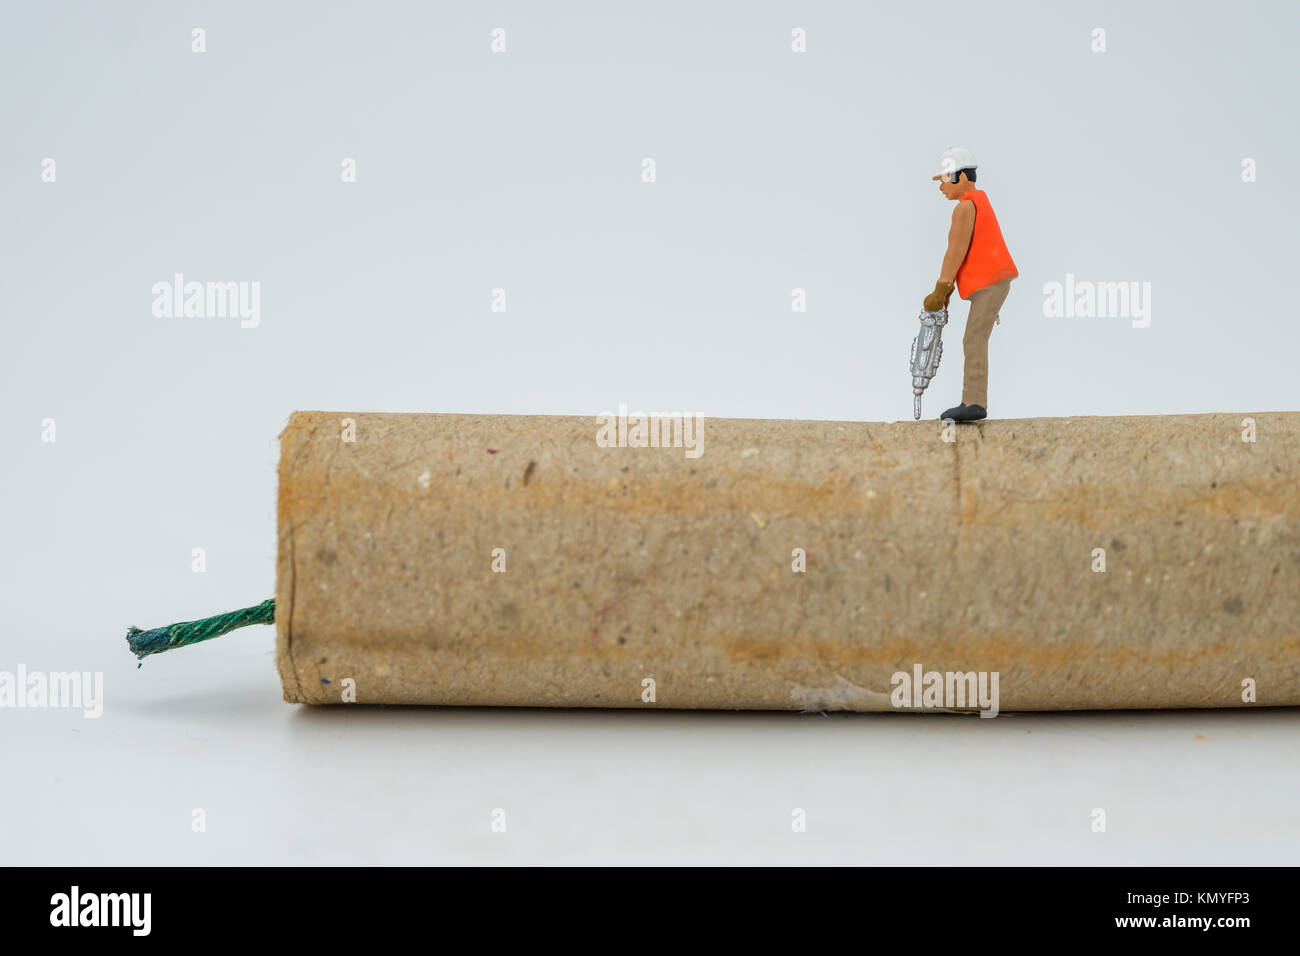 Concept miniature people destroying a Firecracker or dynamite Stock Photo